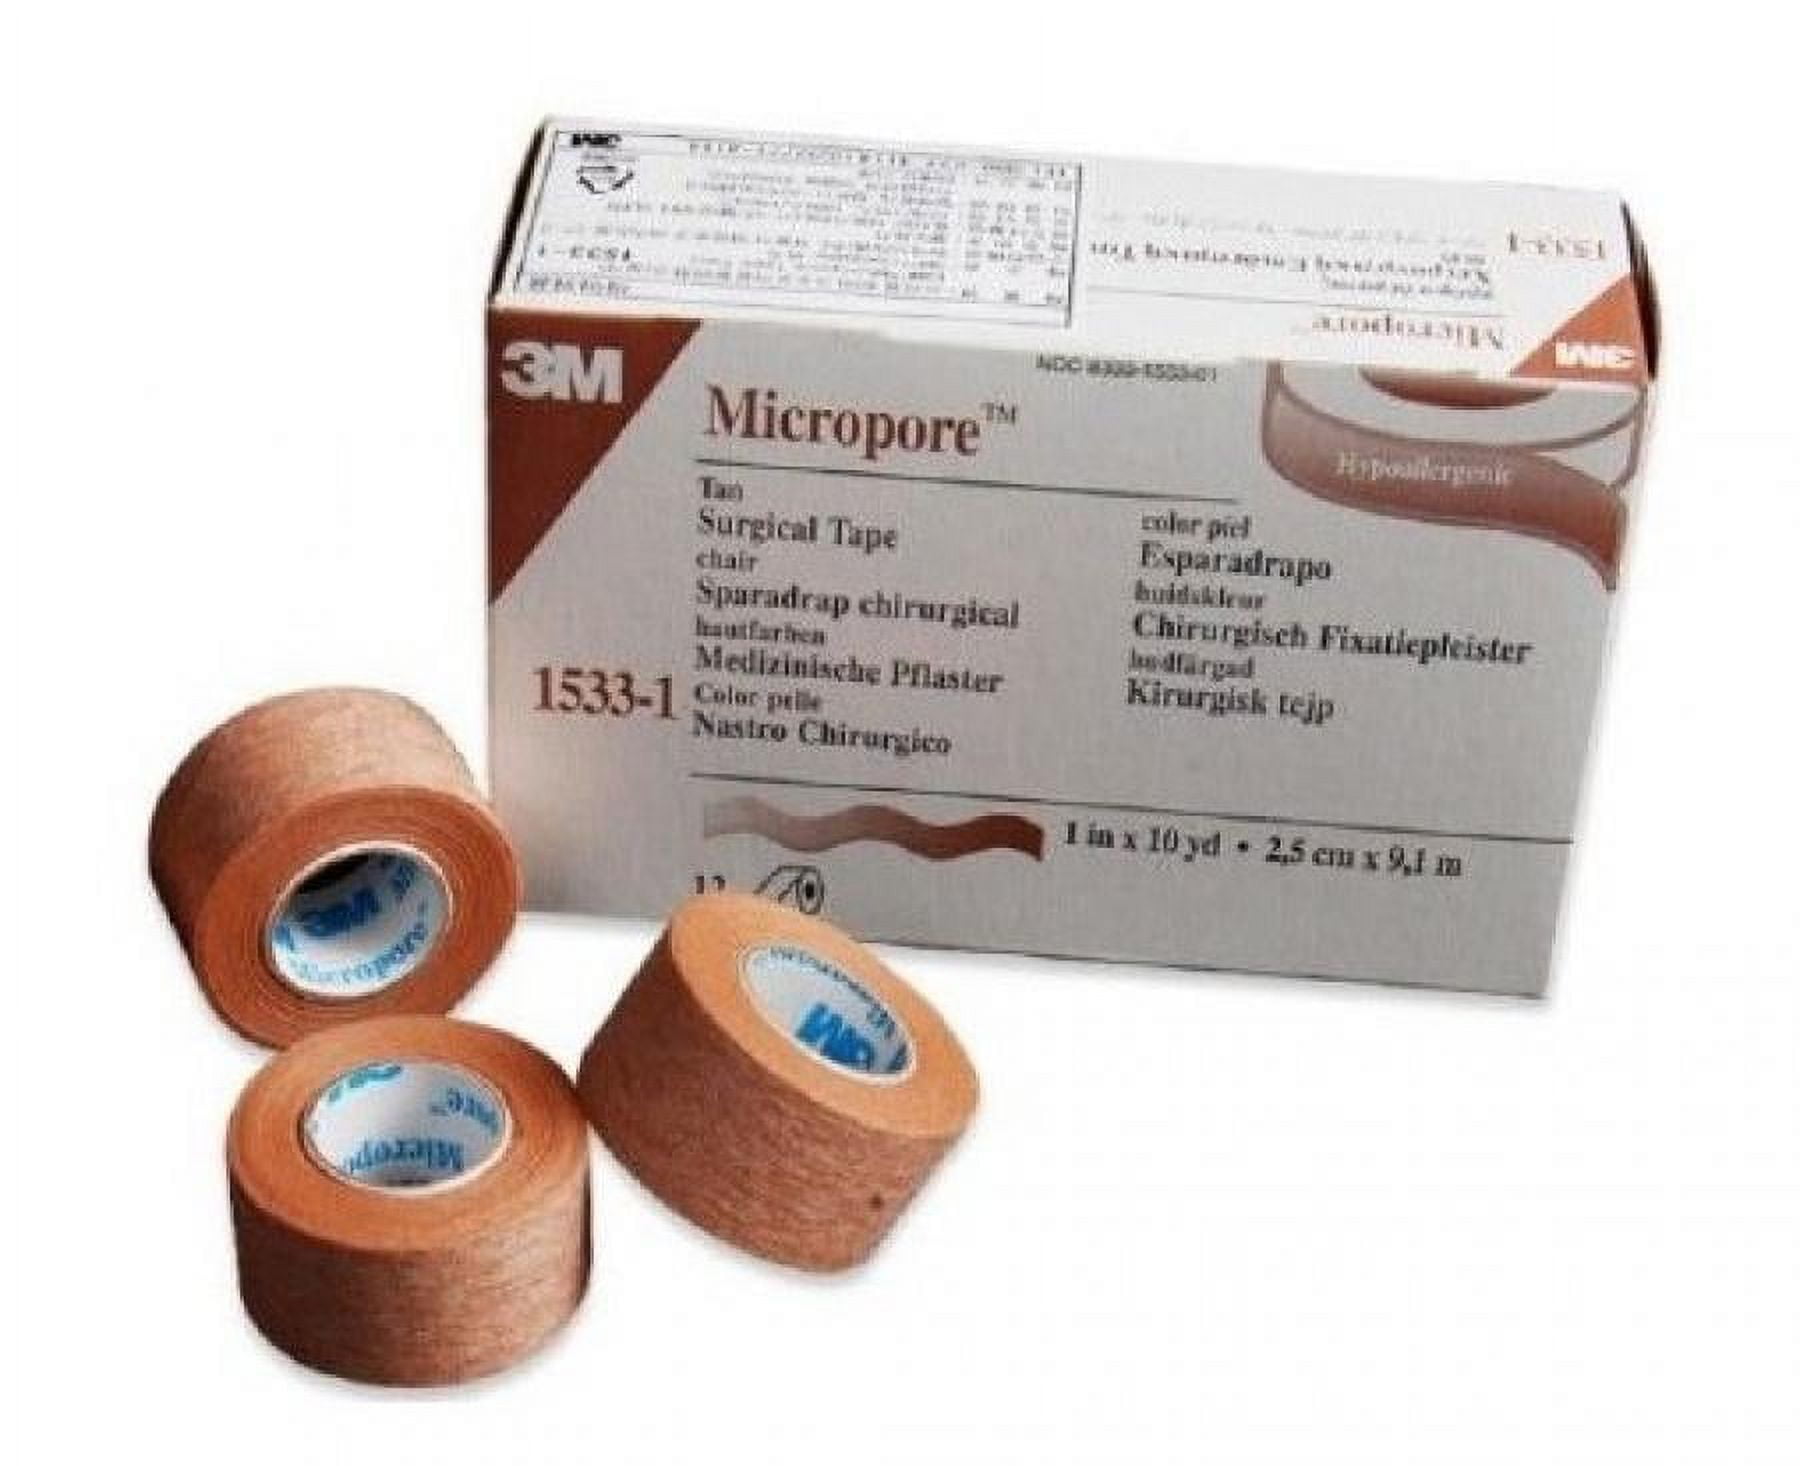 3M Micropore Paper Medical Tape: 1 x 10 yds, 1 Count Tan